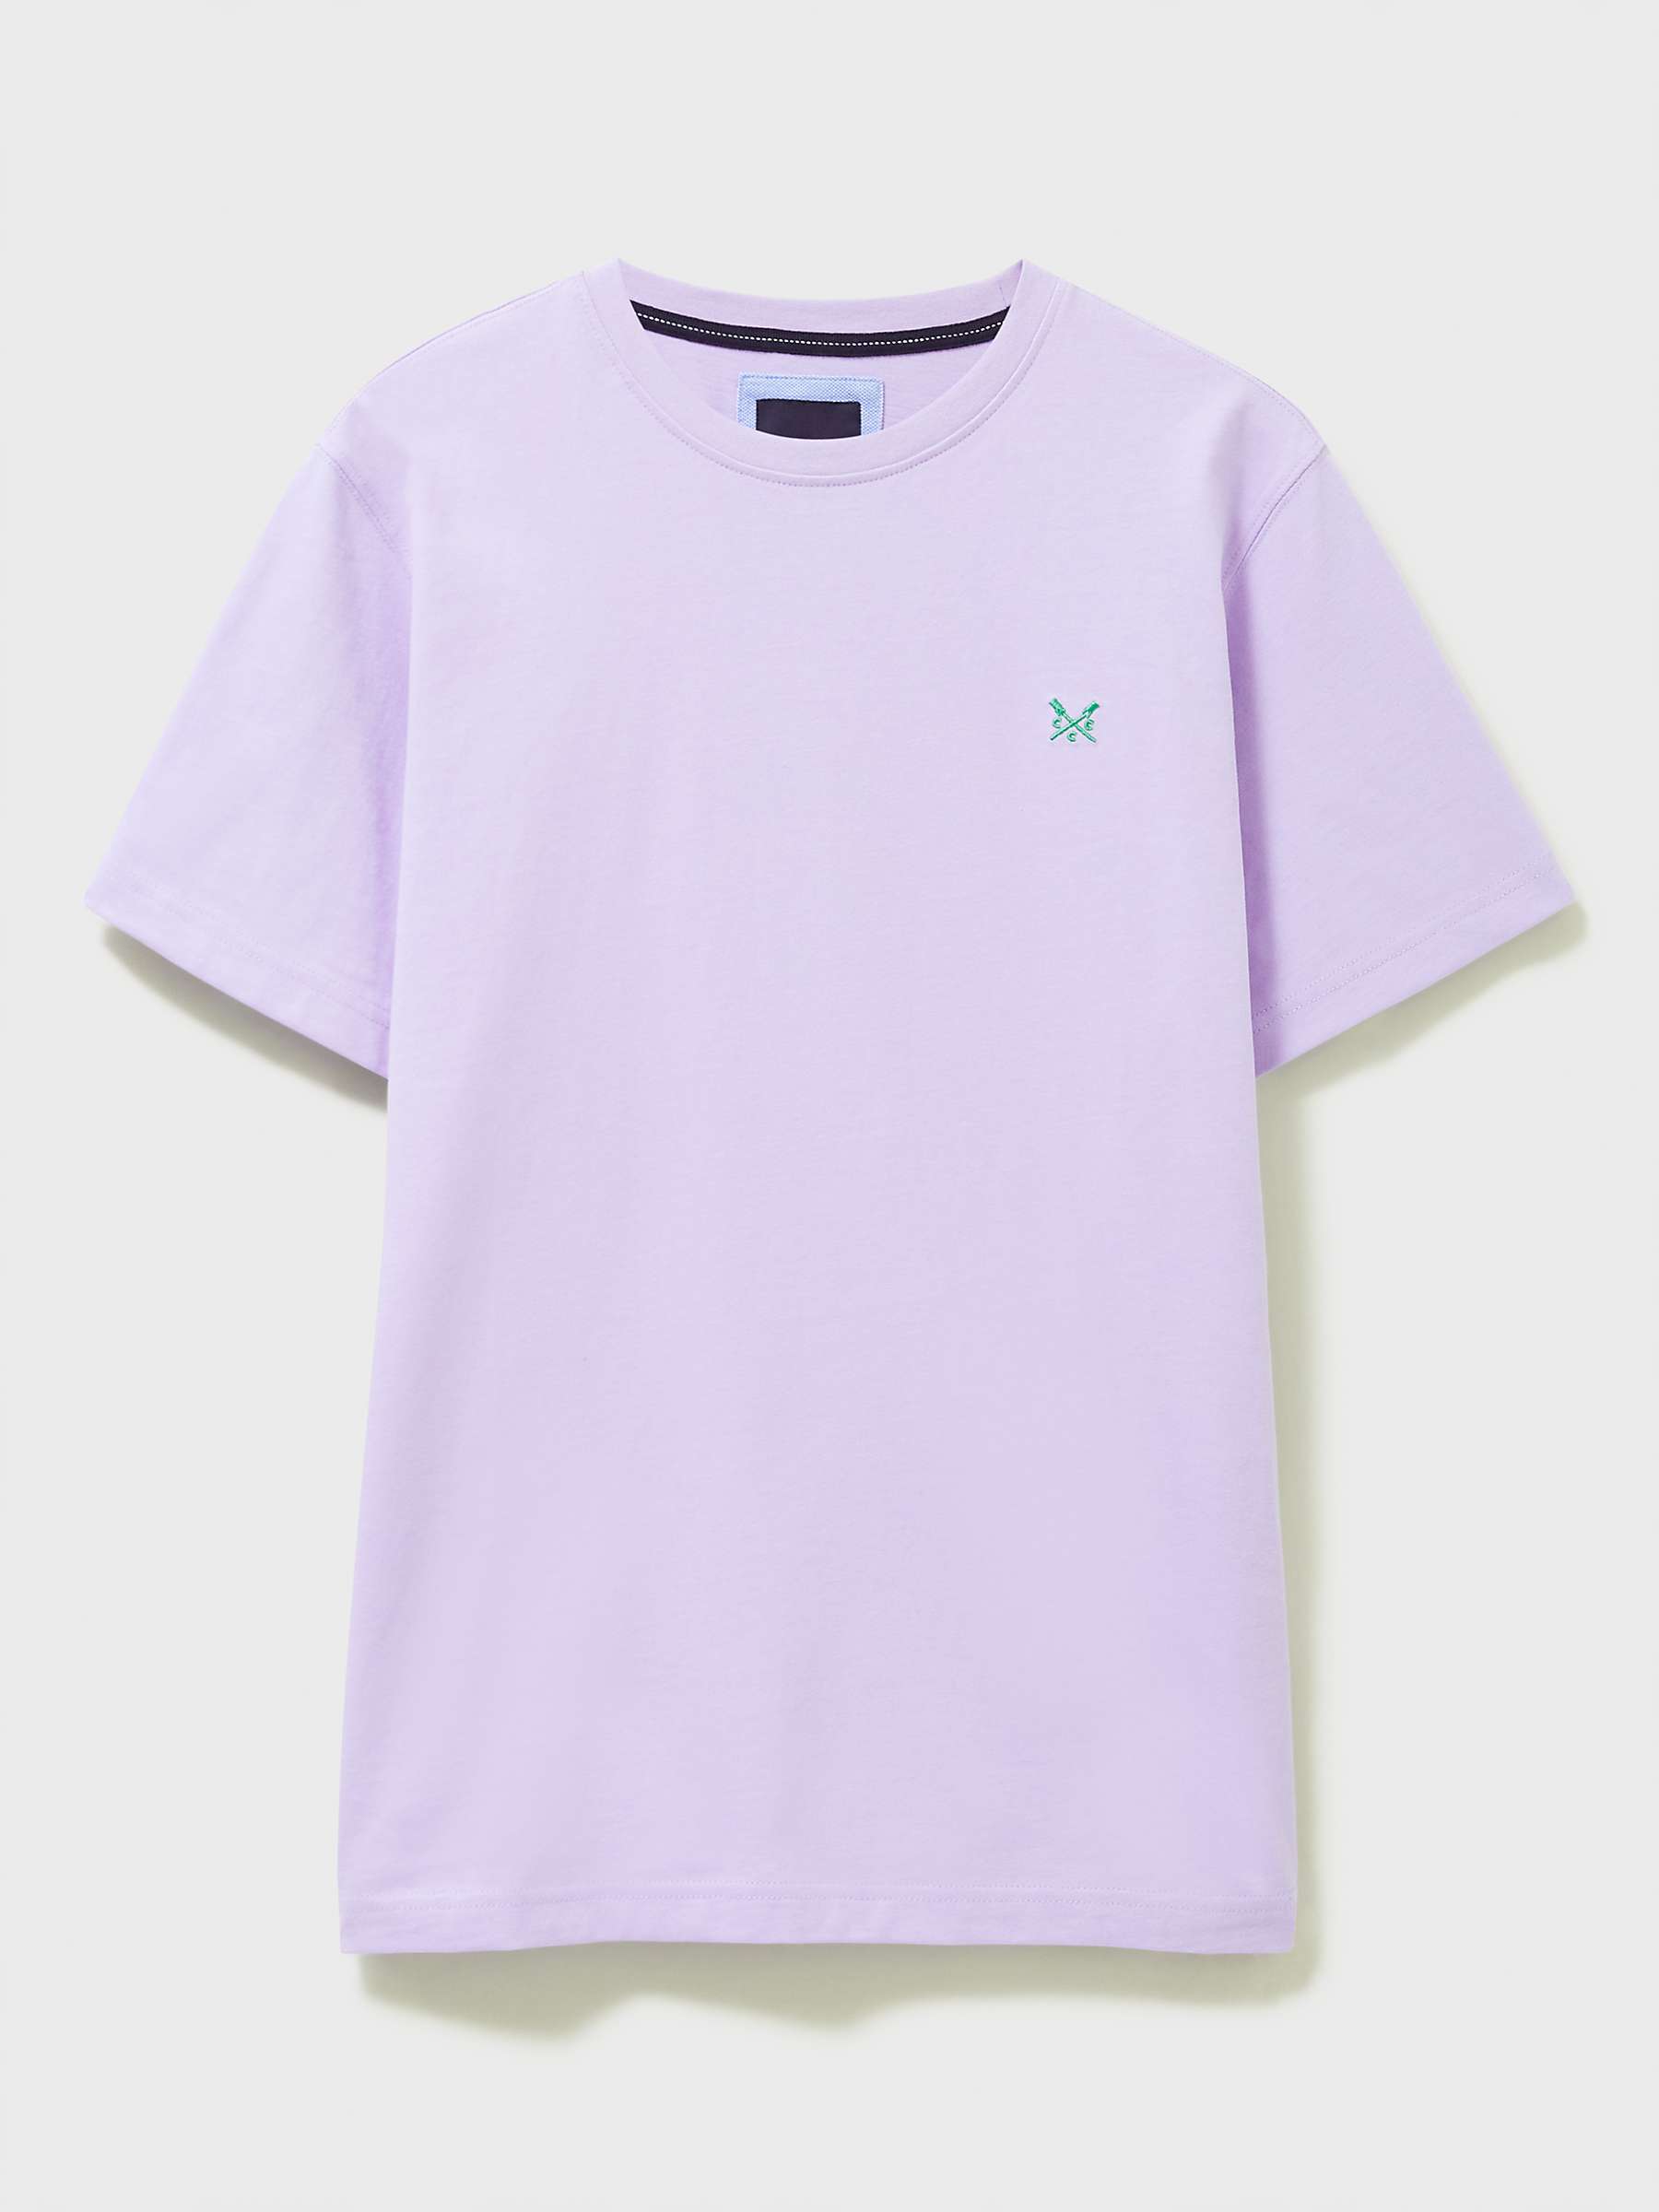 Buy Crew Clothing Crew Neck T-Shirt, Lilac Online at johnlewis.com